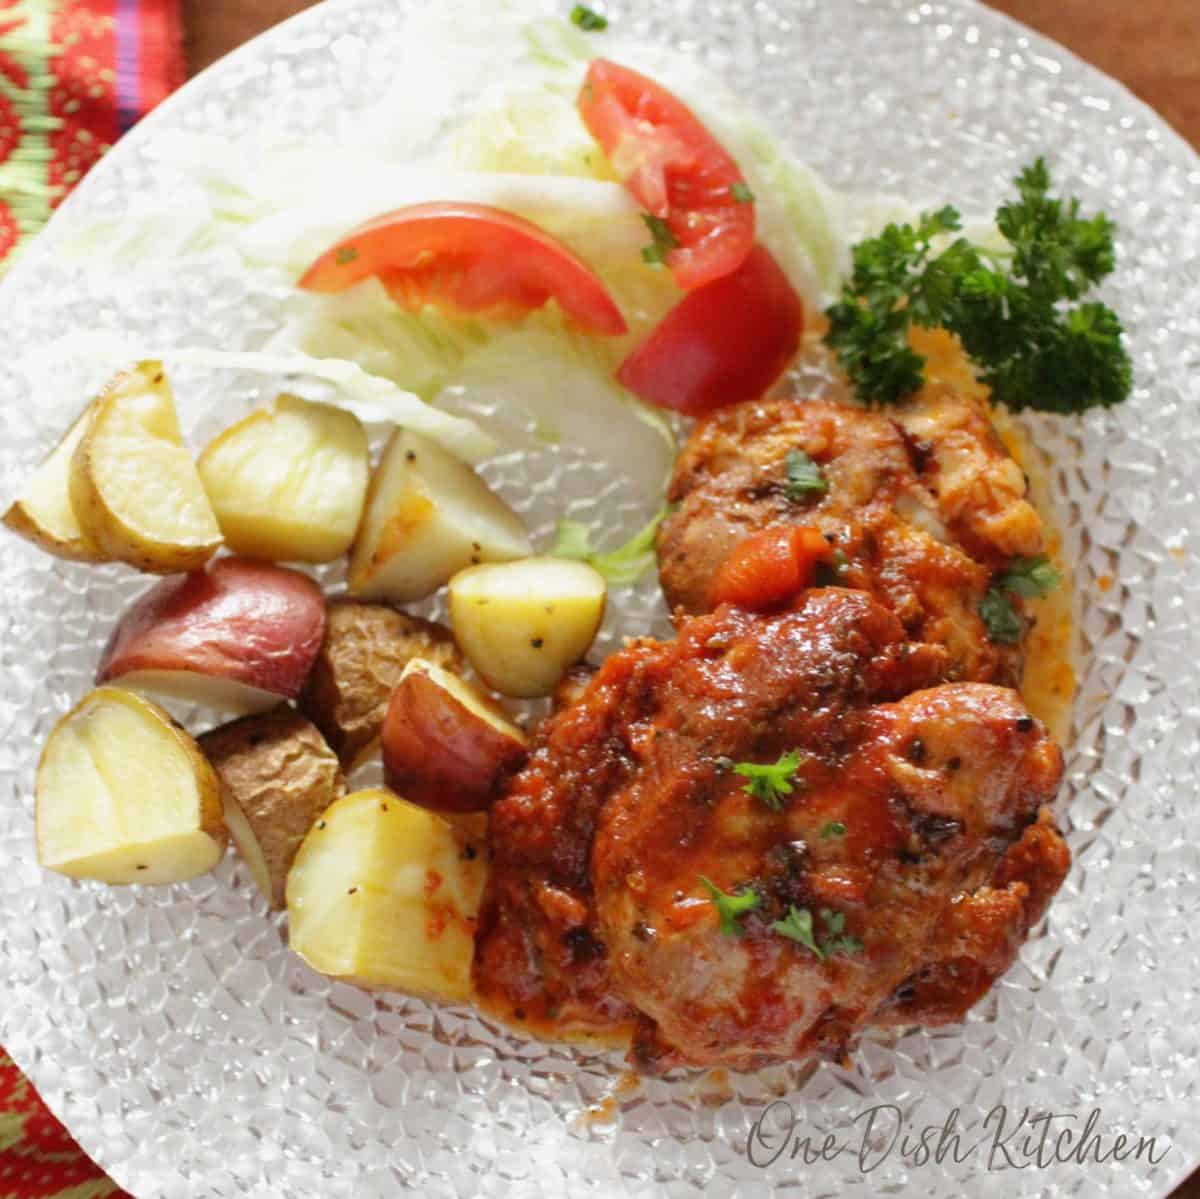 An overhead view of italian chicken with a small salad of iceberg lettuce and tomato slices and chopped roasted potatoes on a plate.